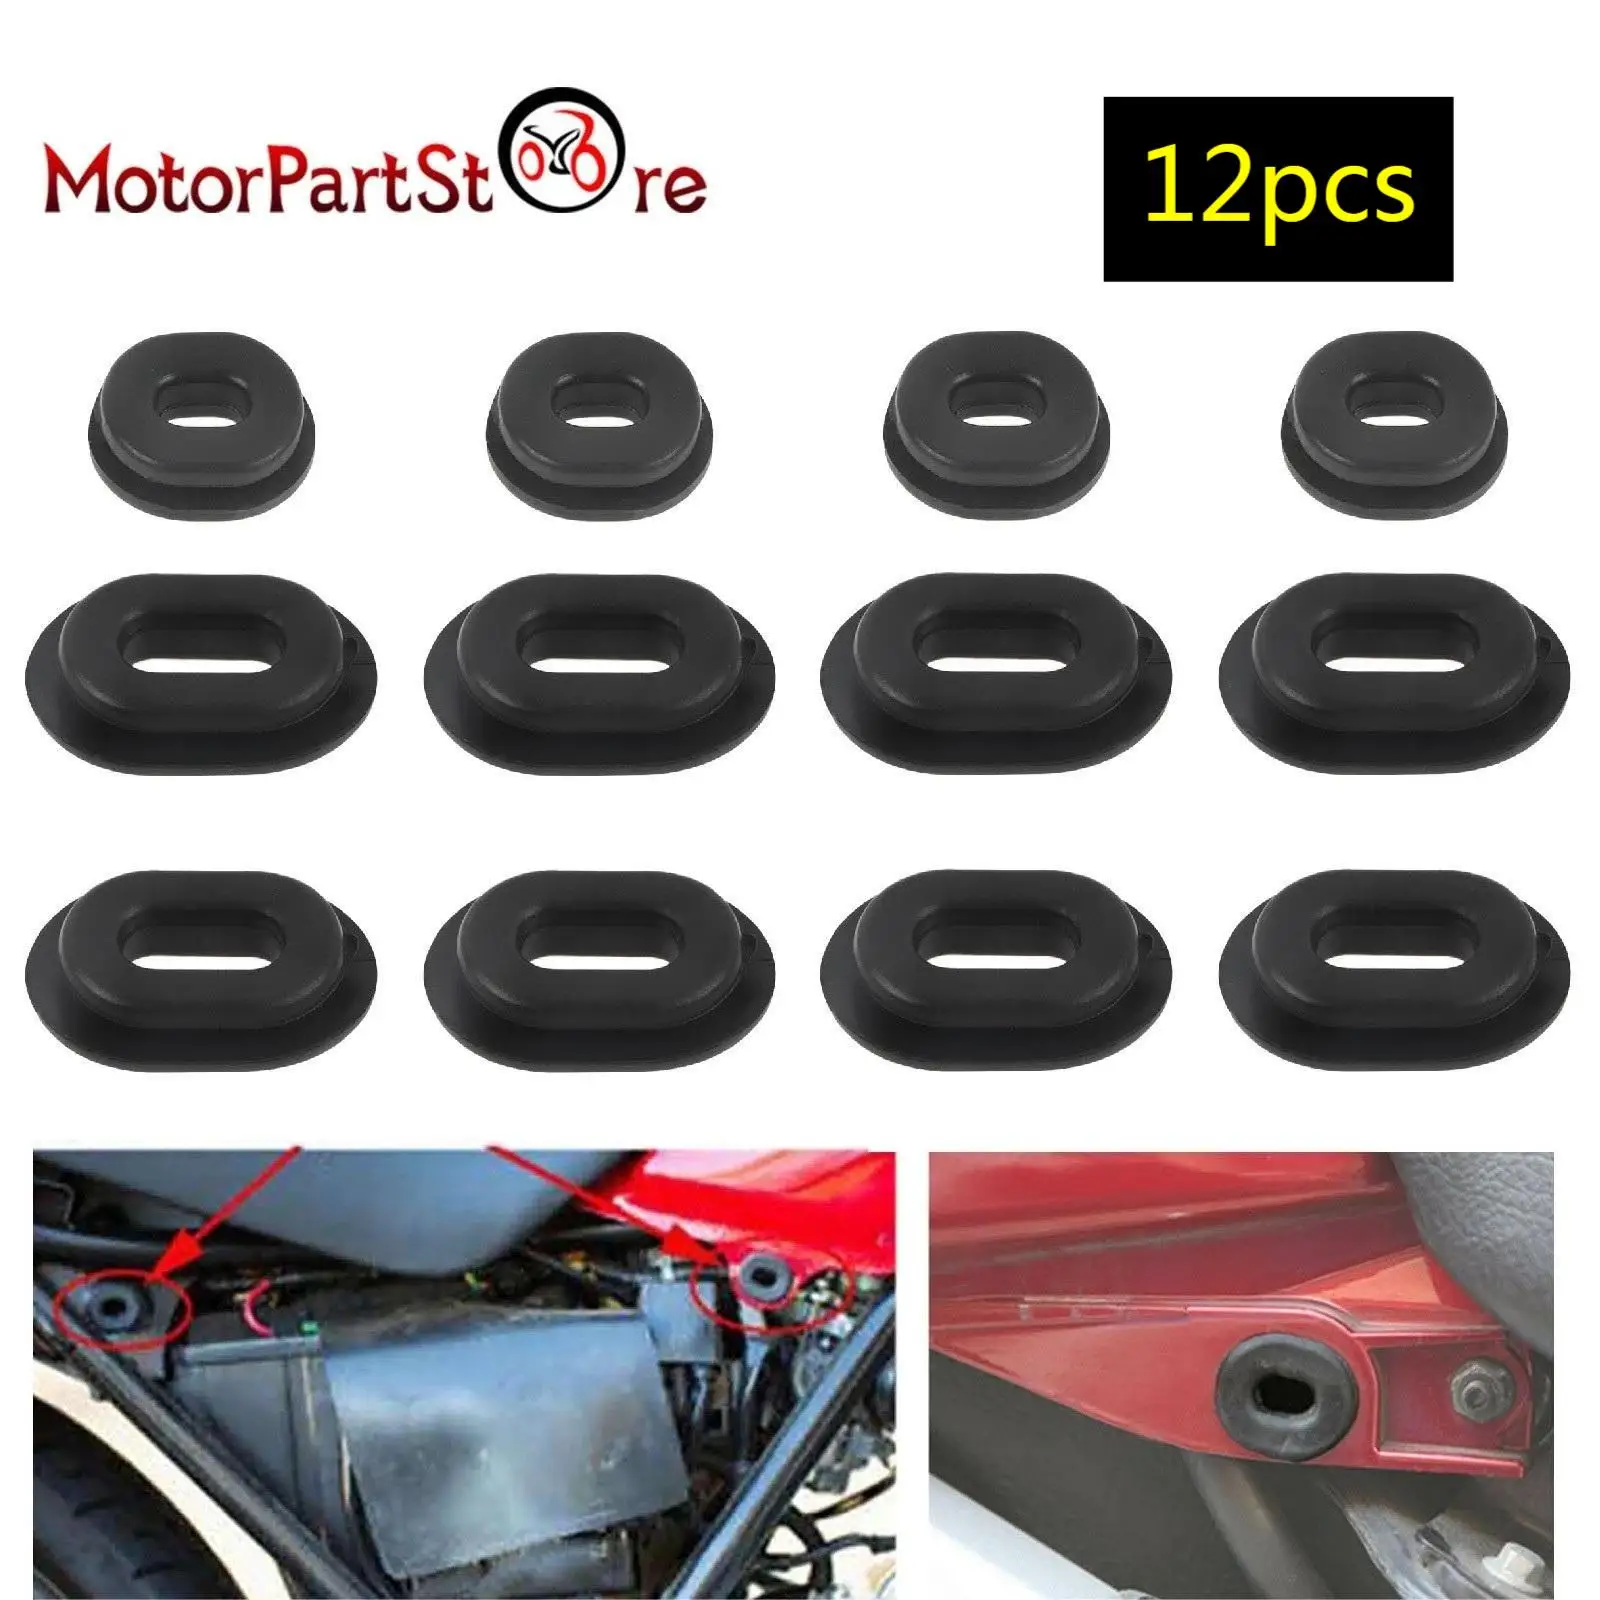 12pcs Motorcycle Side Cover Rubber Grommet Fairing Bolts Goldwing for Honda CG125 CB 100 550K 550F 750F CB125S CL XL 100 125 SL